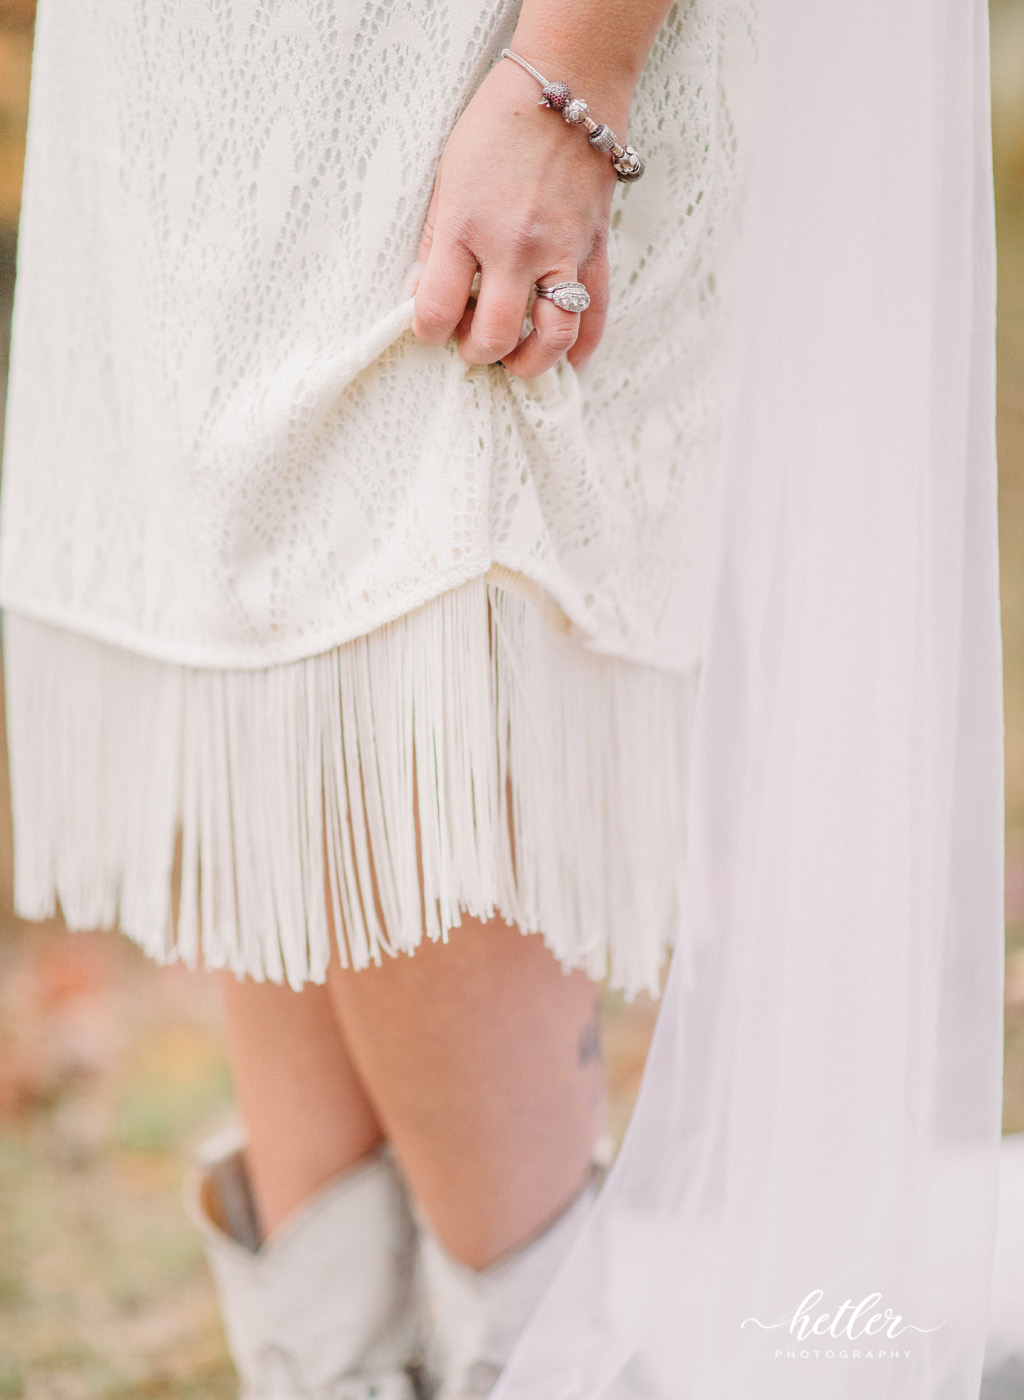 Bride in dress from Idyllwind at Pictured Rocks elopement